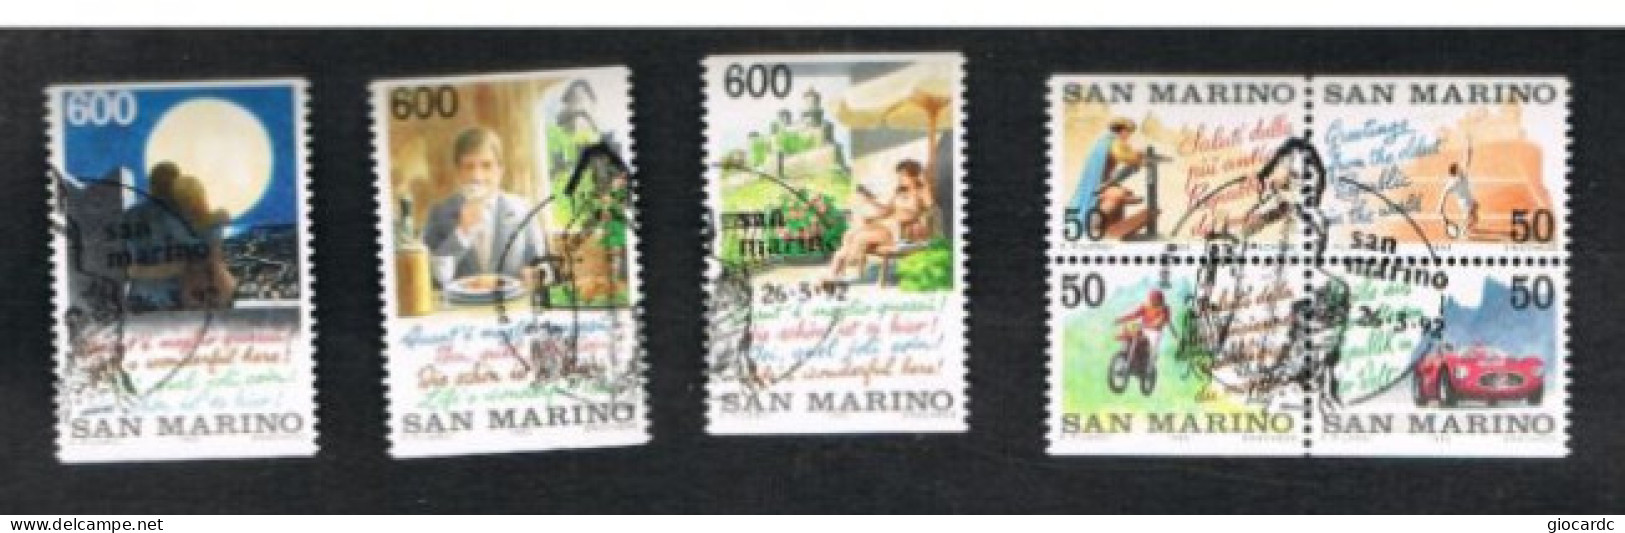 SAN MARINO - UN 1344.1350 - 1992 SITI TURISTICI DI SAN MARINO (COMPLET SET OF 7 STAMPS,4 SE-TENANT - BY BOOKLET)  - USED - Usados